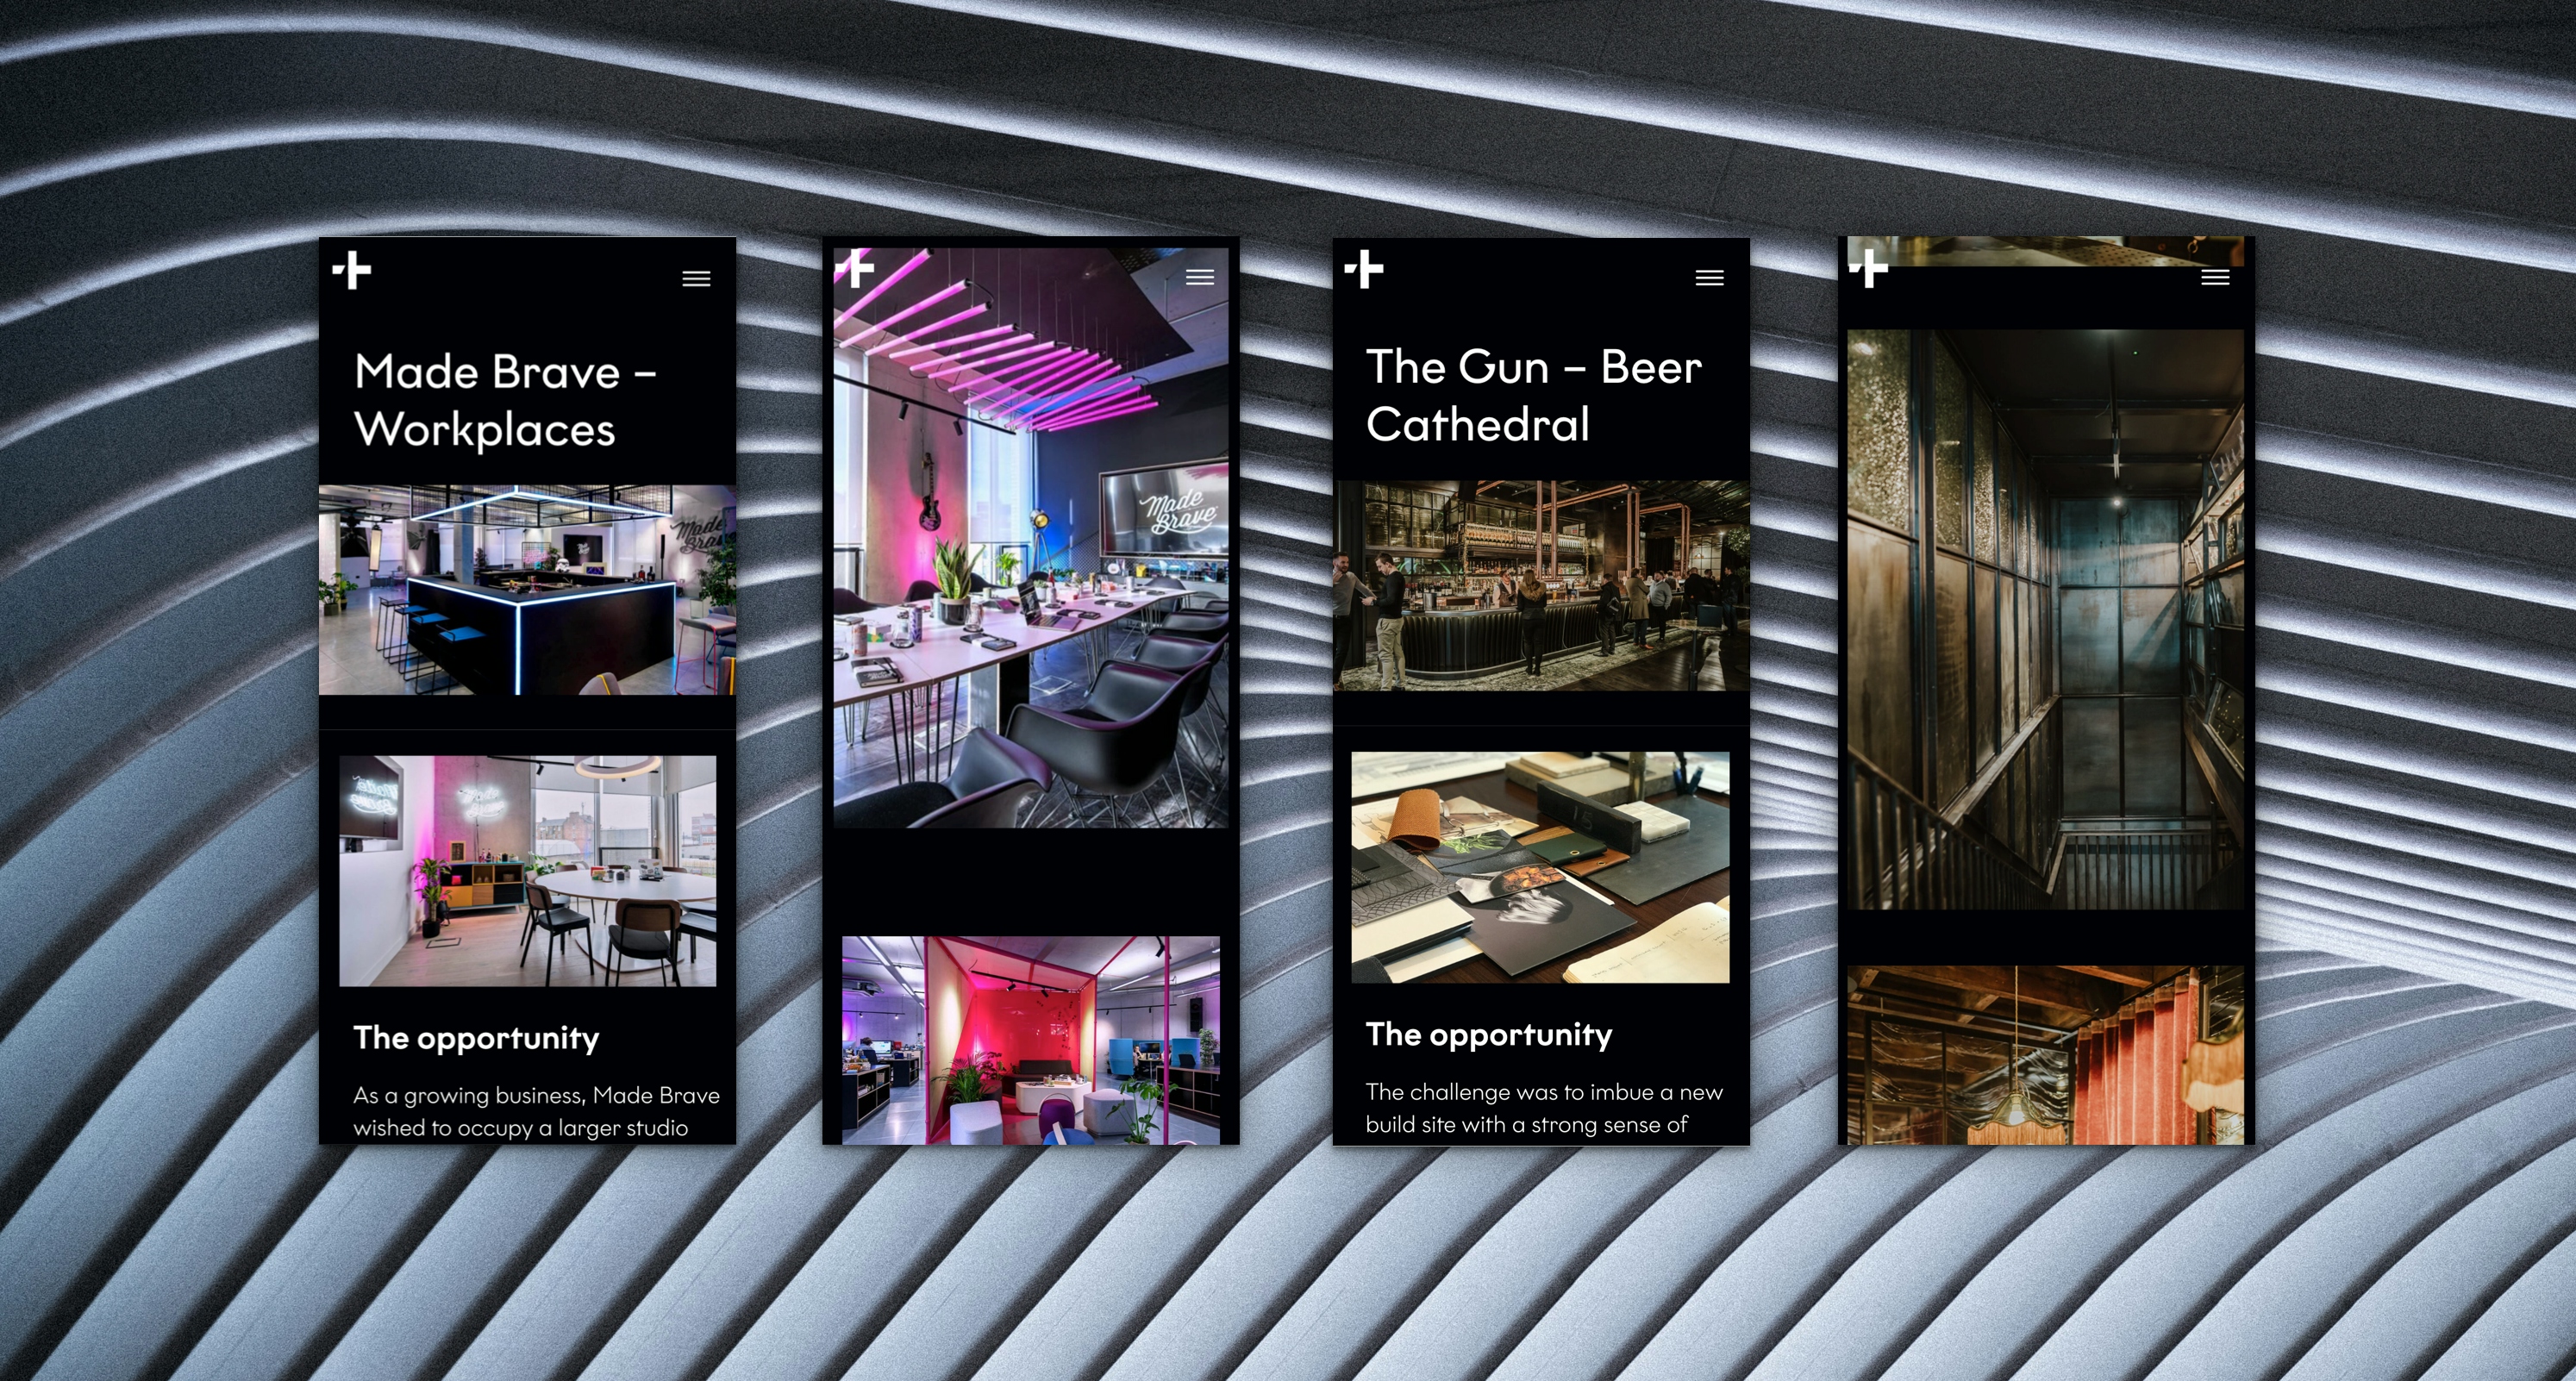 Four mobile style pages in black sit on a grey sand dune background. The first is for “Made Brave - Workplaces” and features two photos of workplaces and some illustrative text. The third screen is for “The Gun - Beer Cathedral” and features two photos of a bar and some illustrative text. The next screen features two bar images